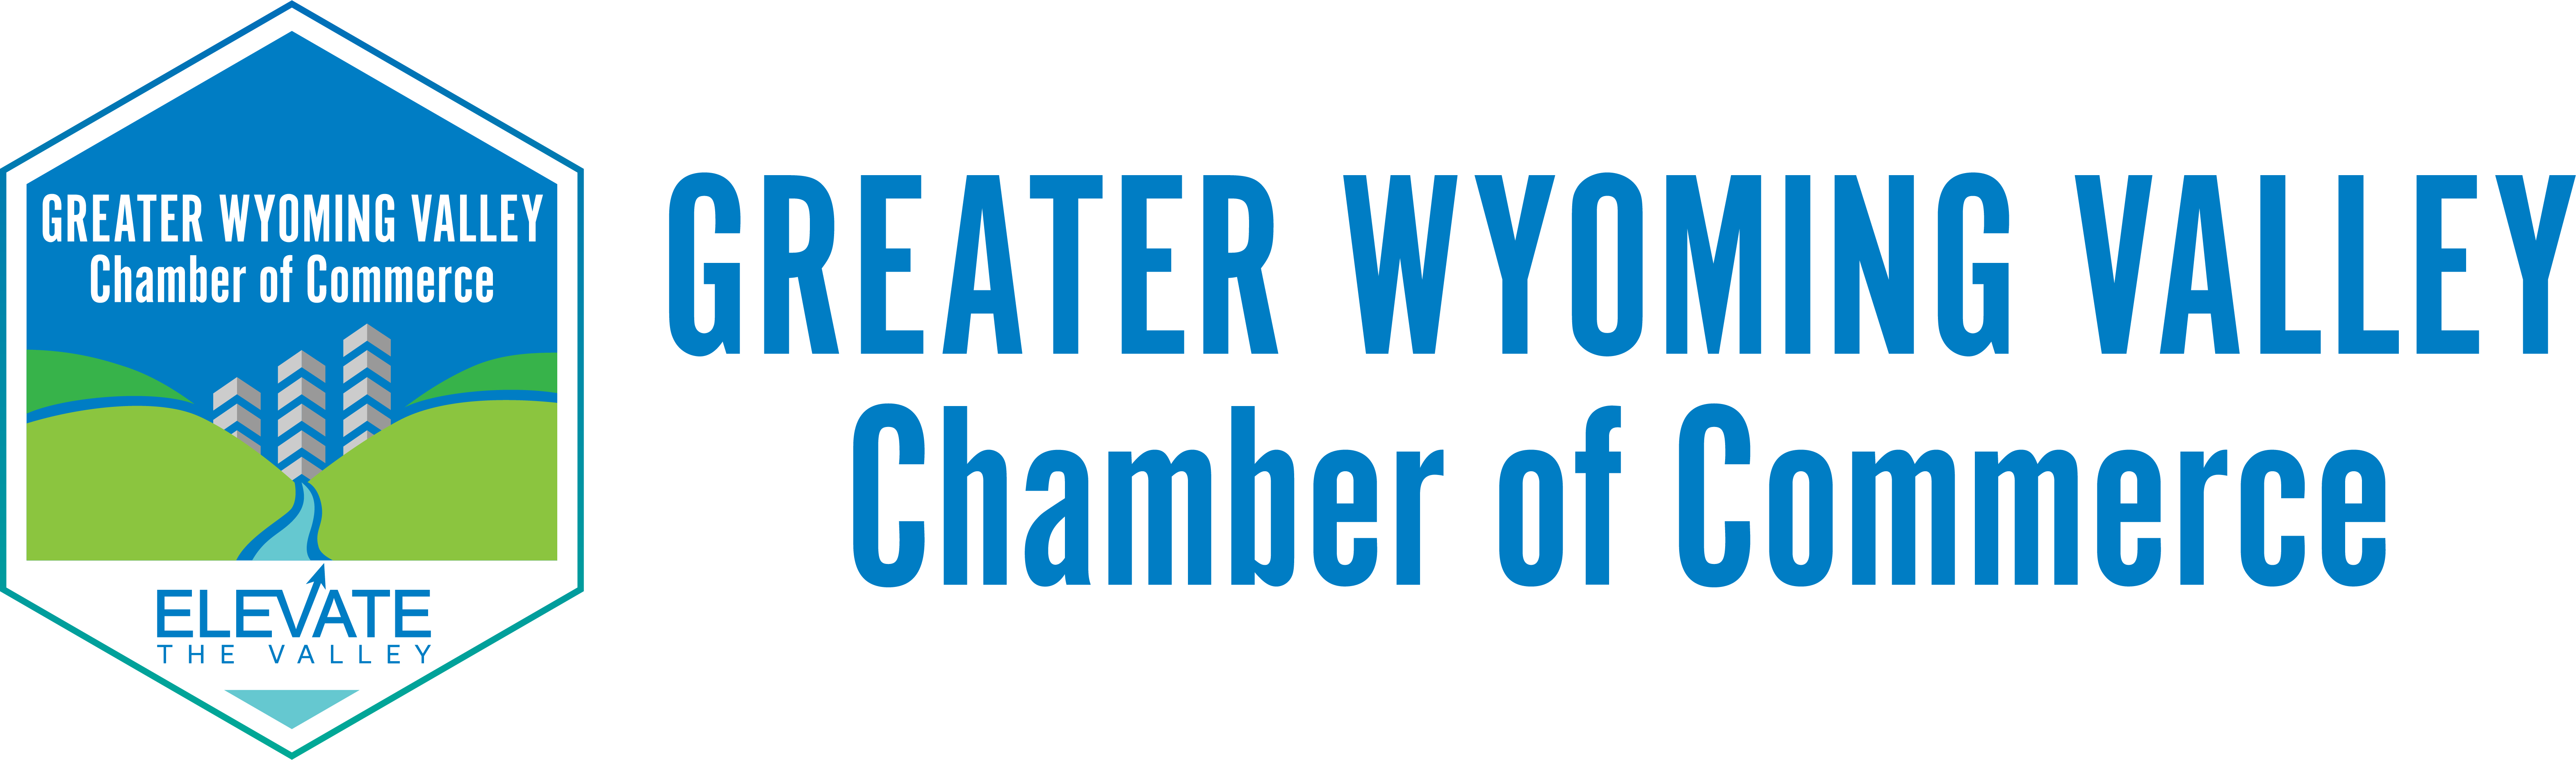 Wyoming Valley Chamber of Commerce